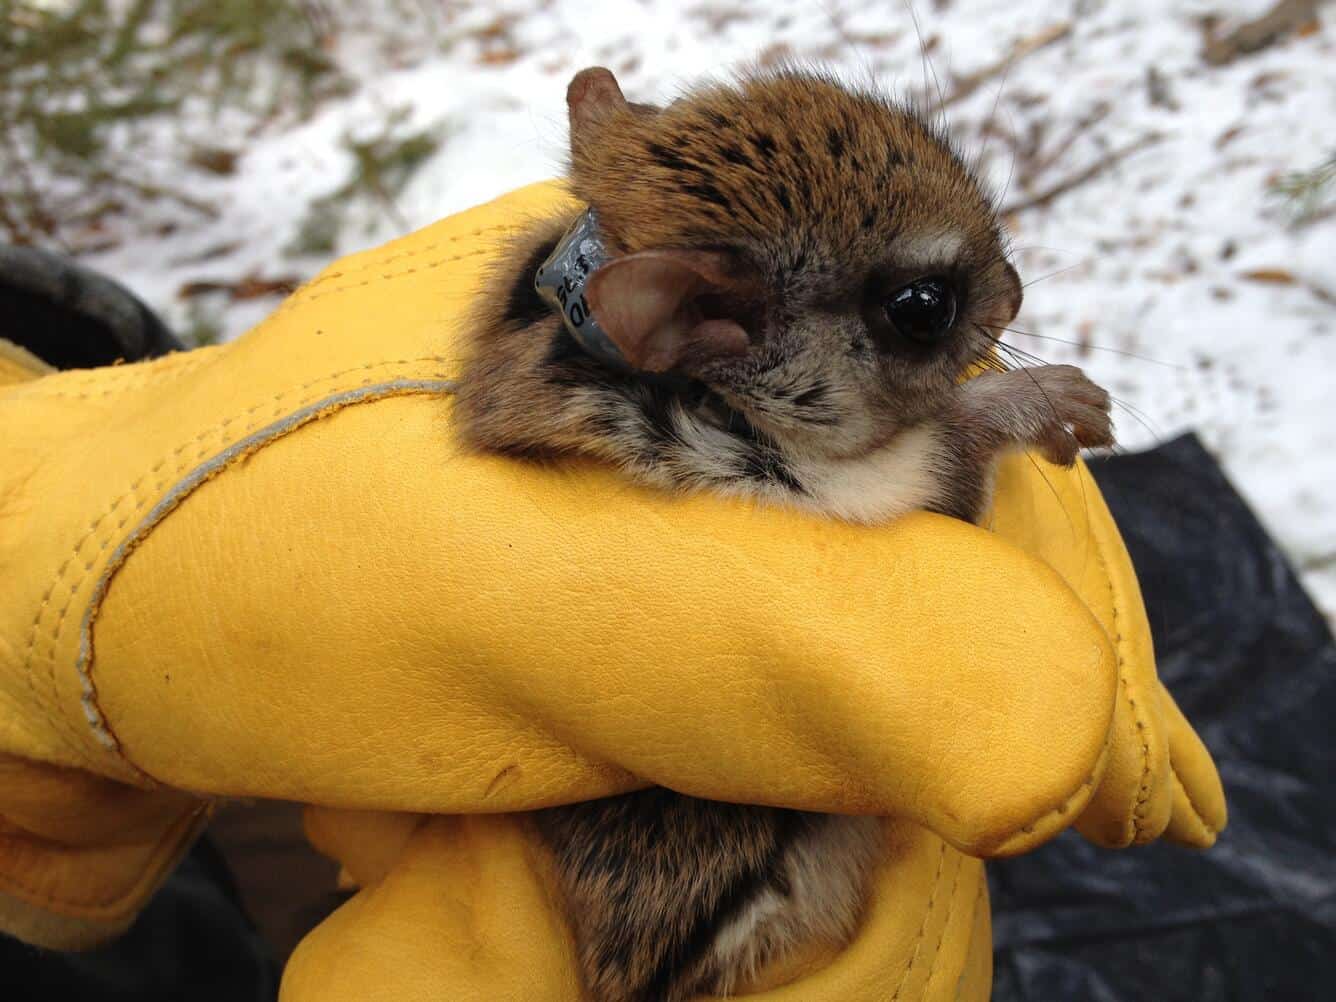 Carolina Northern Flying Squirrel with a radio collar held in a gloved hand.